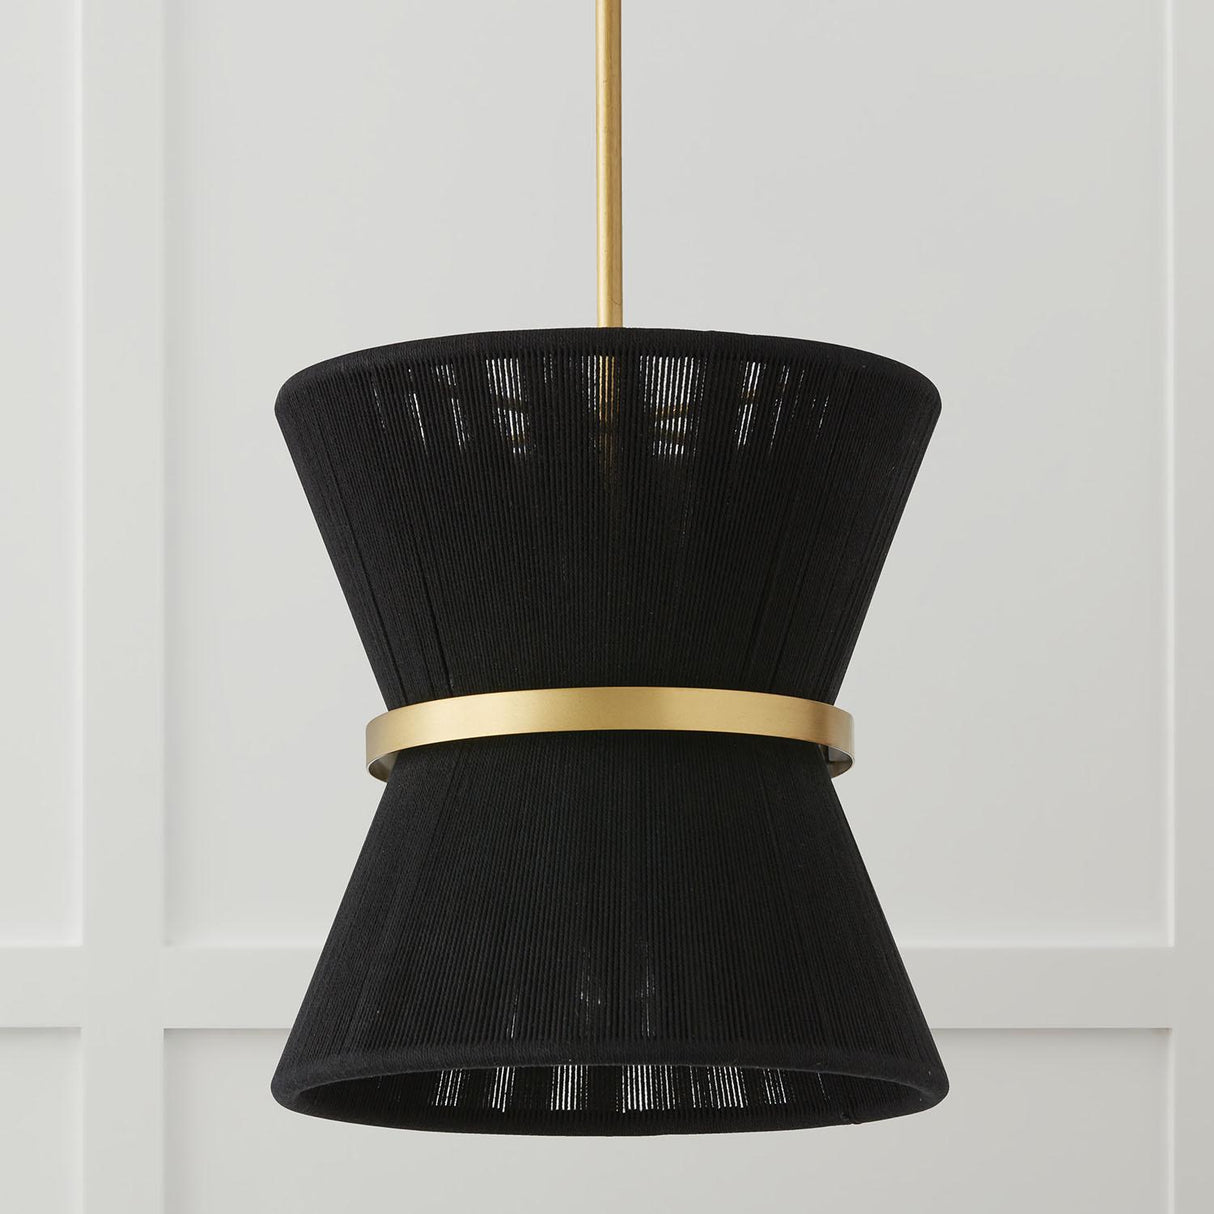 Capital Lighting 341211KP Cecilia 1 Light Pendant Black Rope and Patinaed Brass